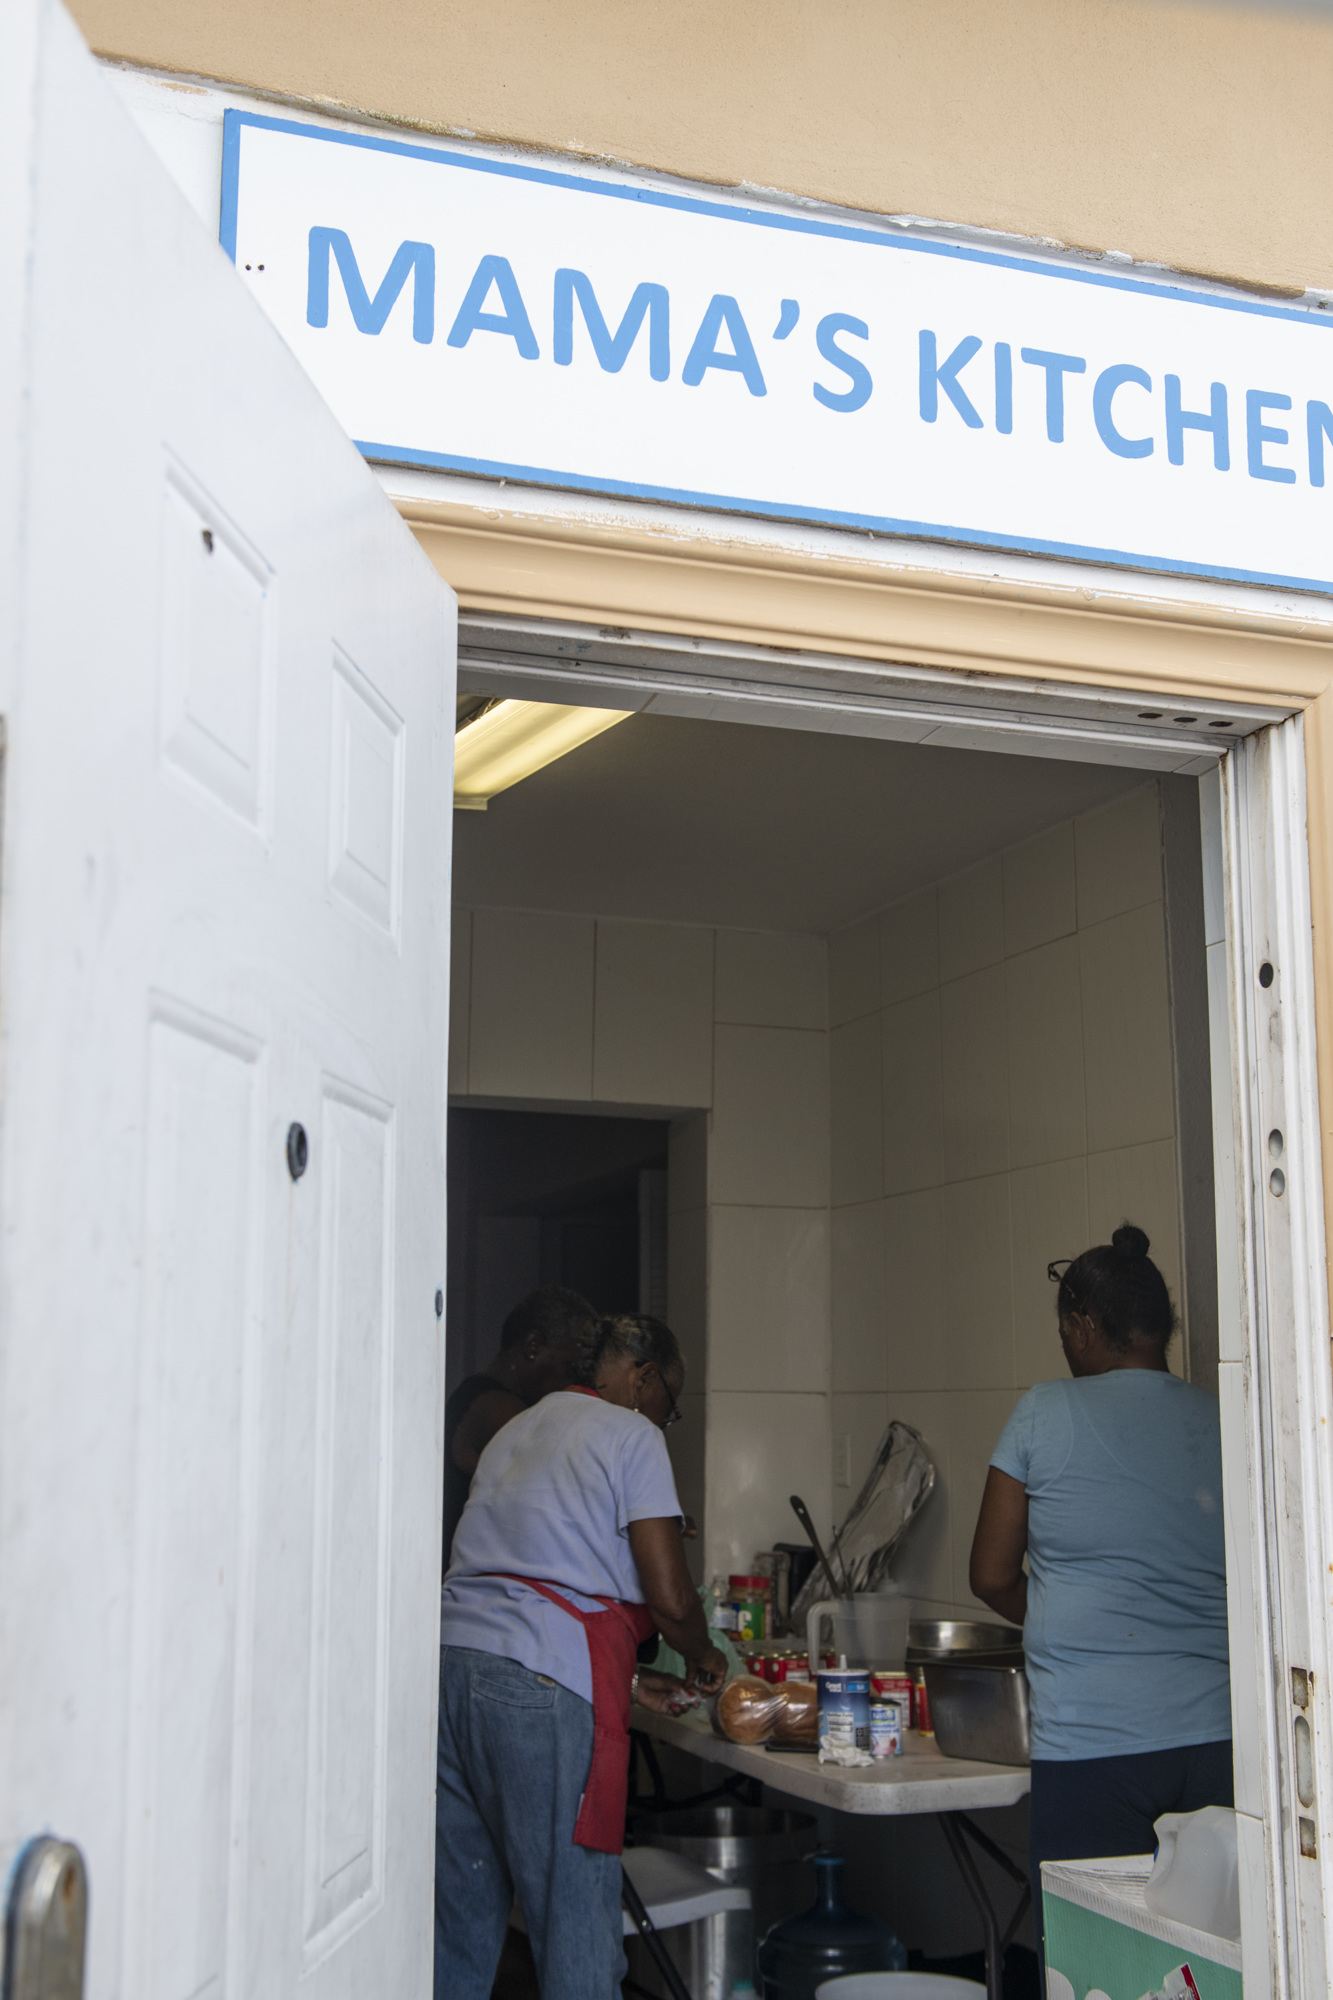 A boys community center in Freeport became an impromptu local outreach center after Hurricane Dorian. The volunteers who work this small kitchen in that outreach center prepare more than 450 meals a day.